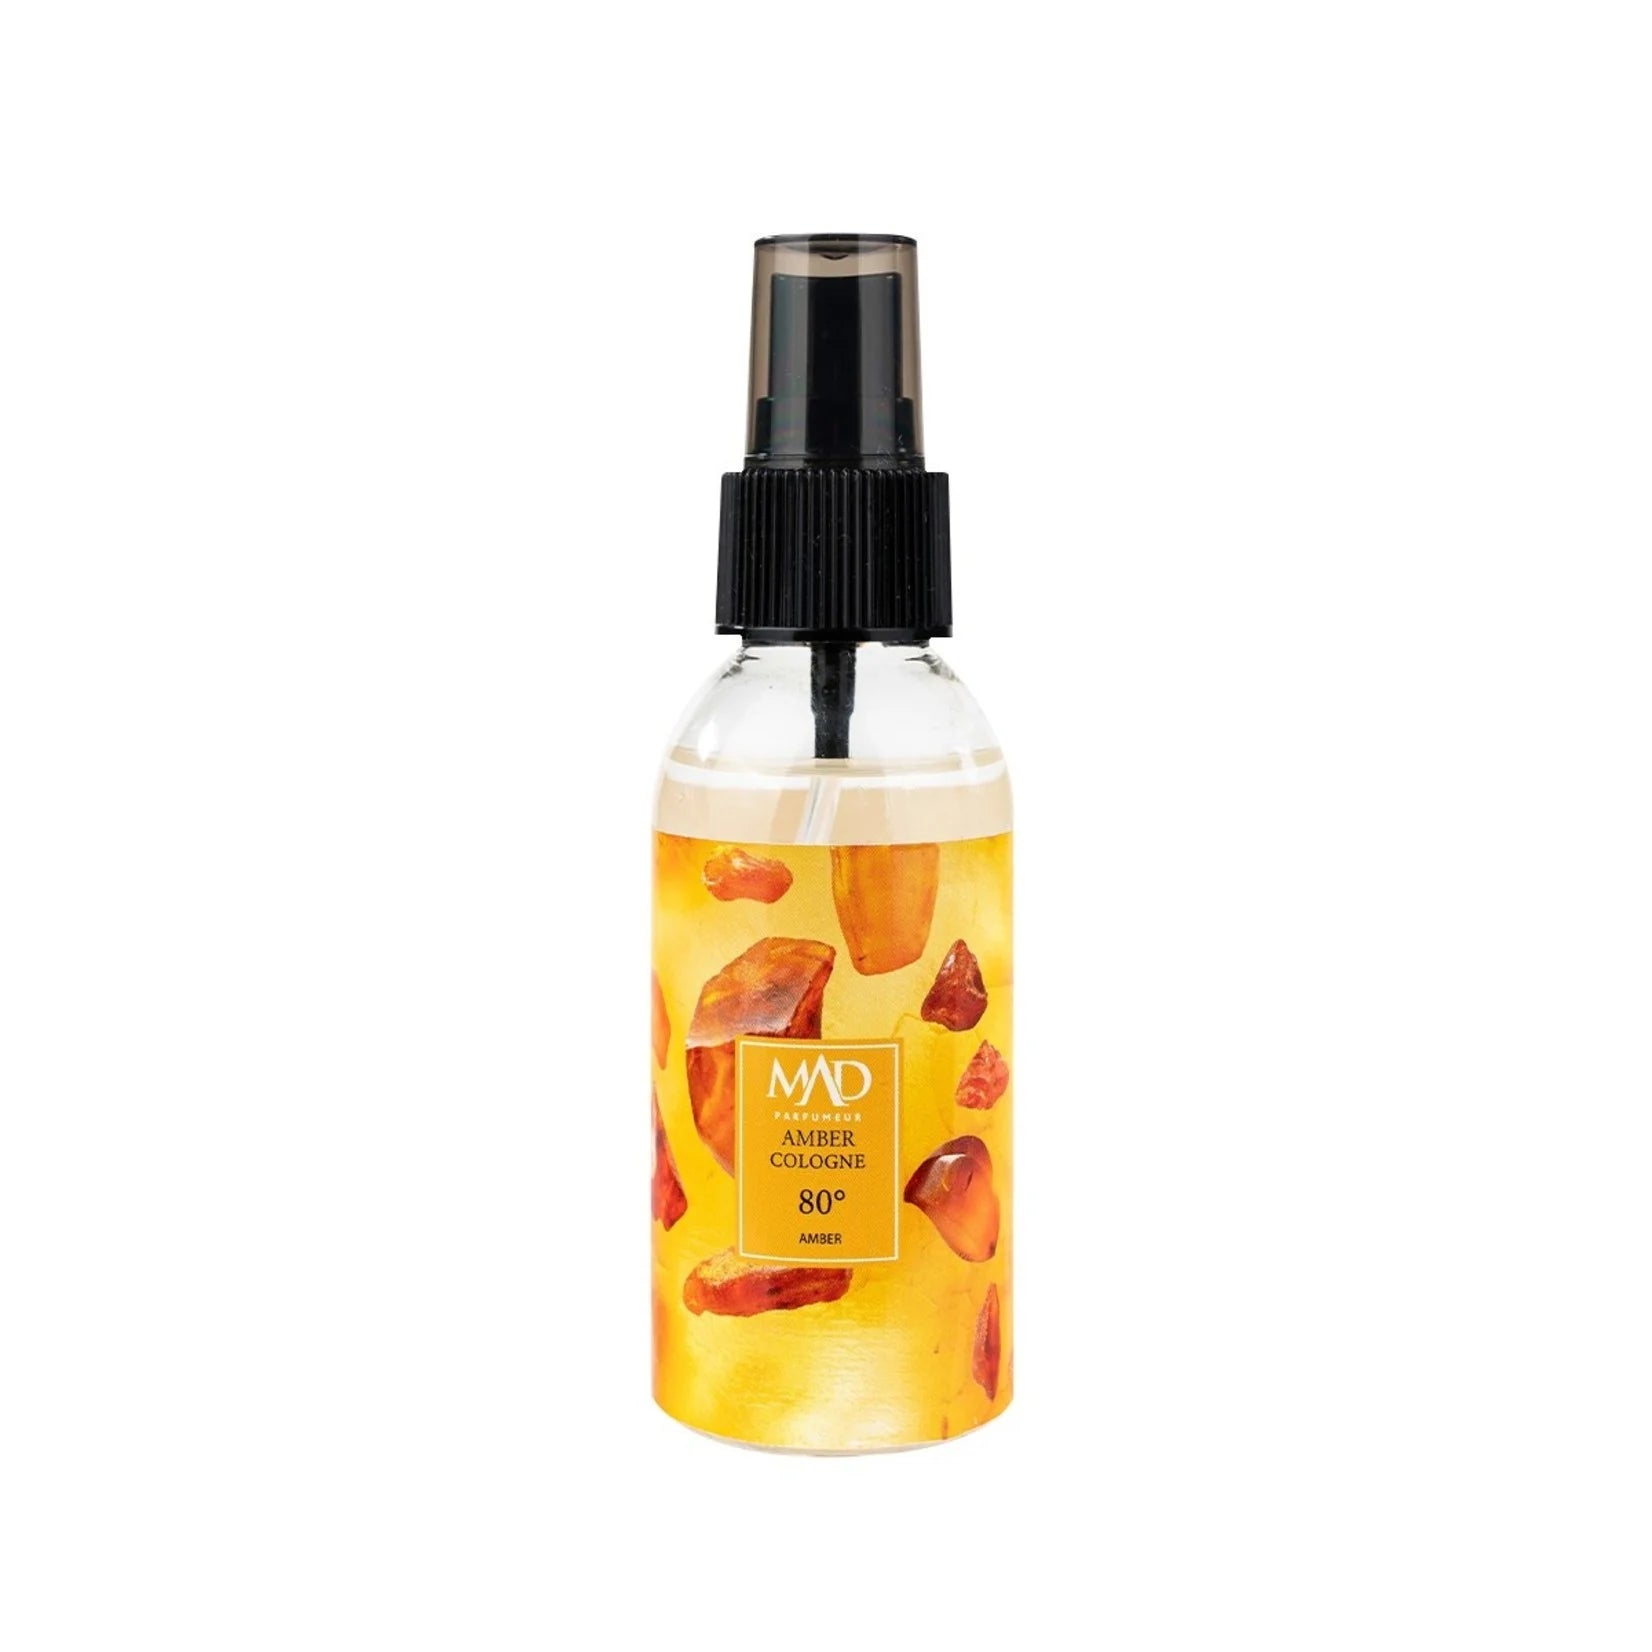 Mad Amber 110 ml Cologne